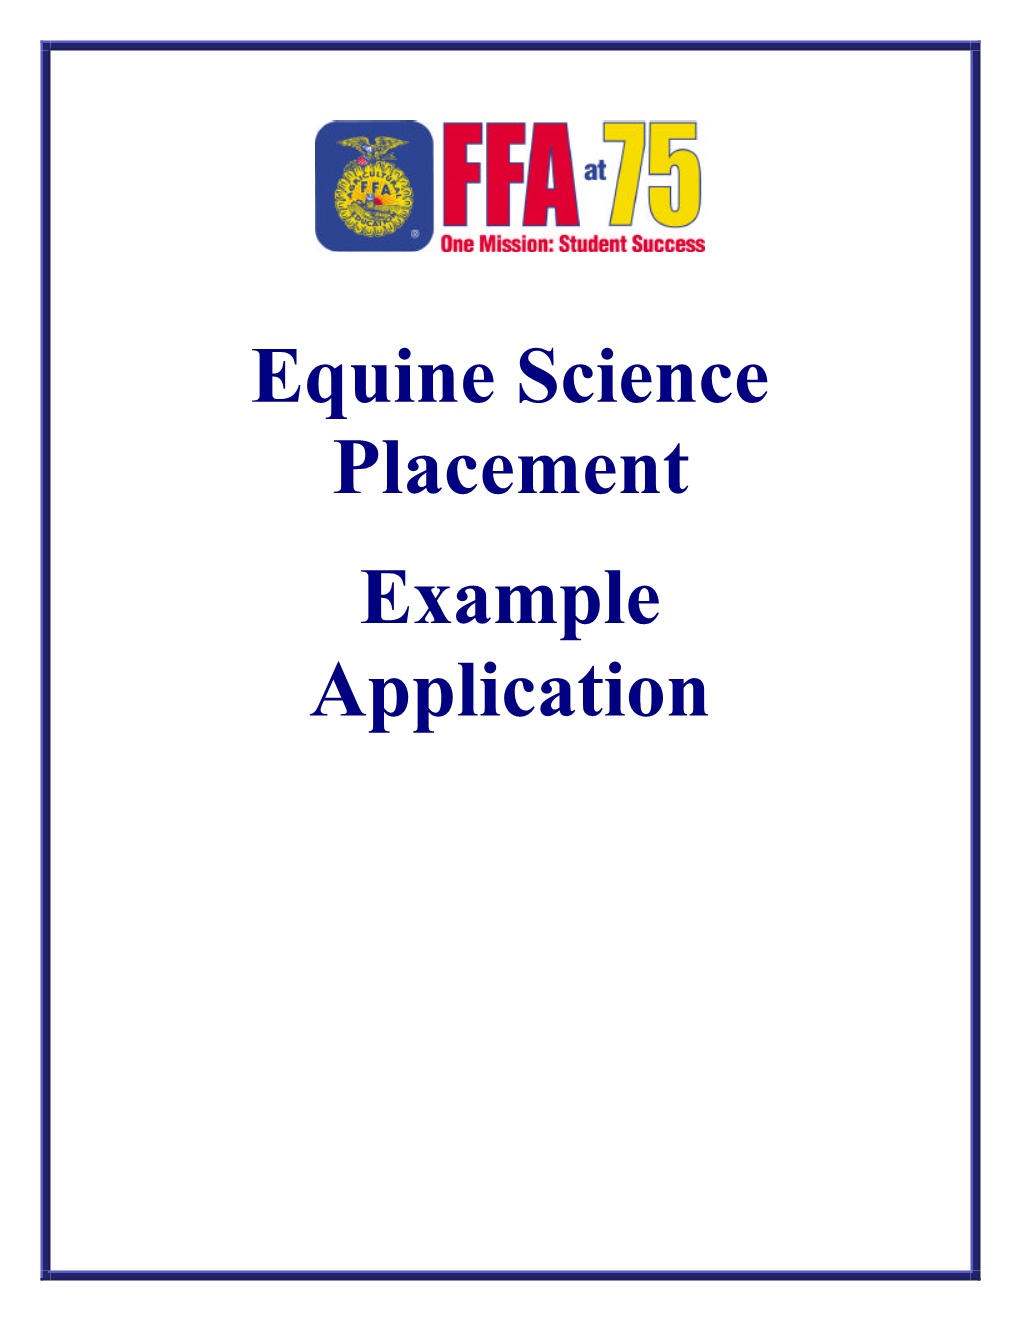 Equine Science Placement Example Application